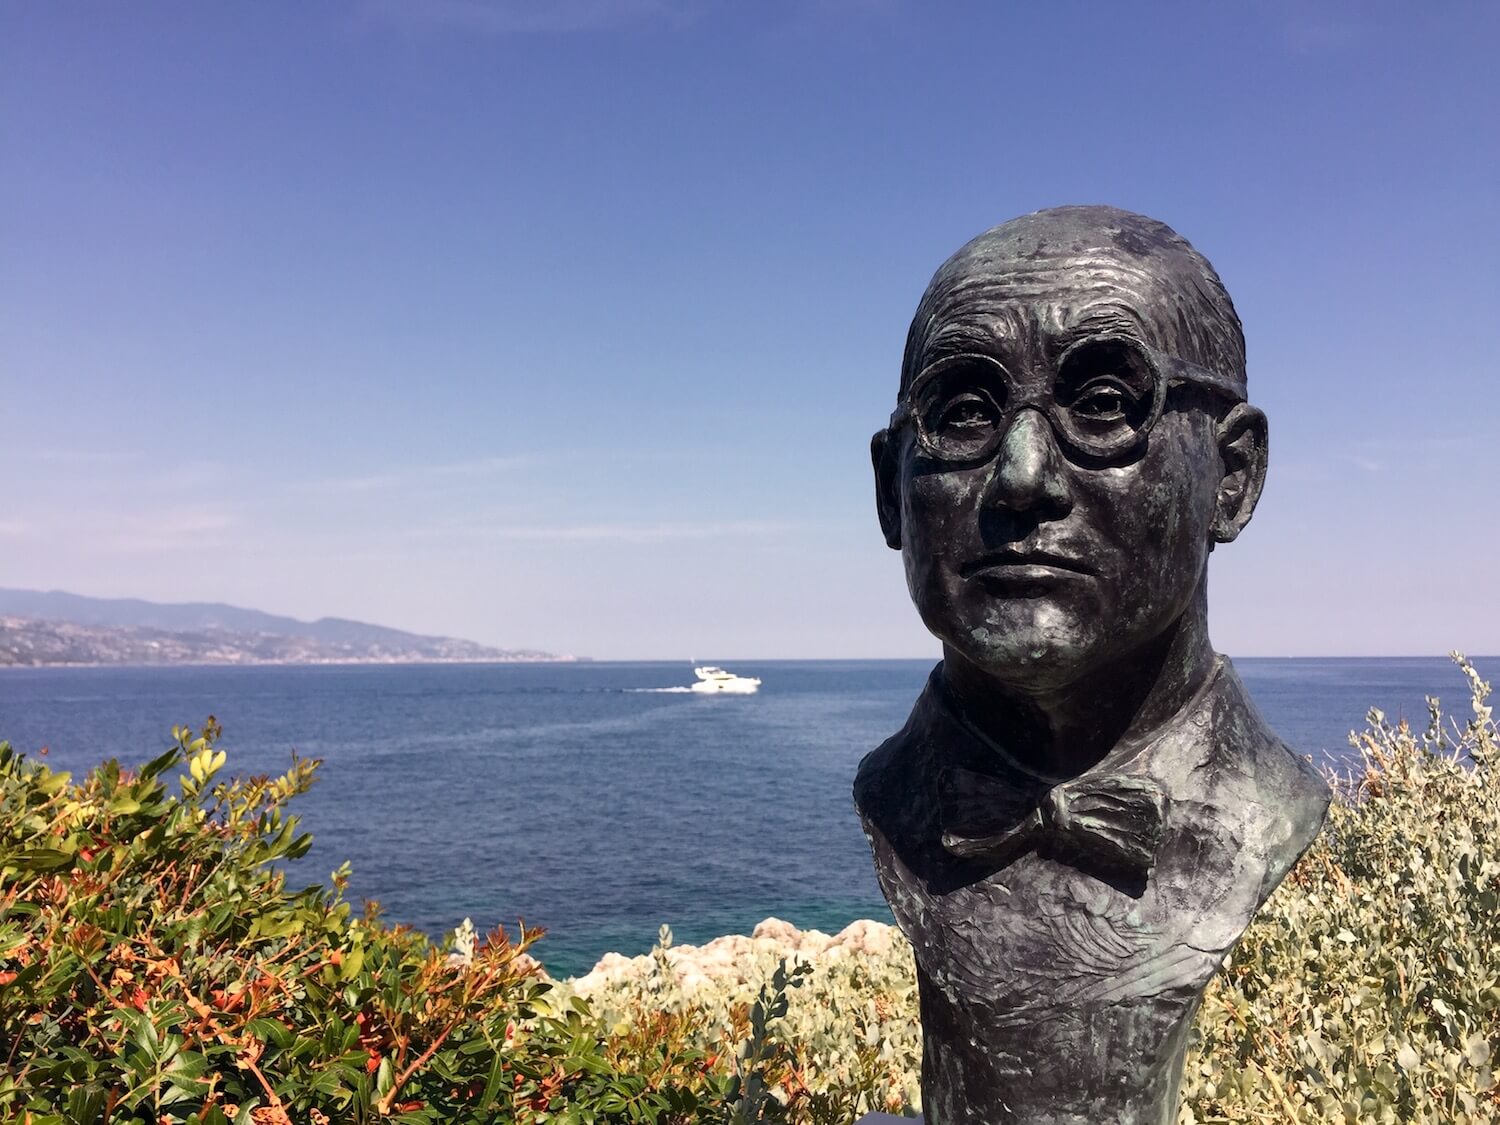 Corbusier Statue overlooking blue sea with yacht cruising along